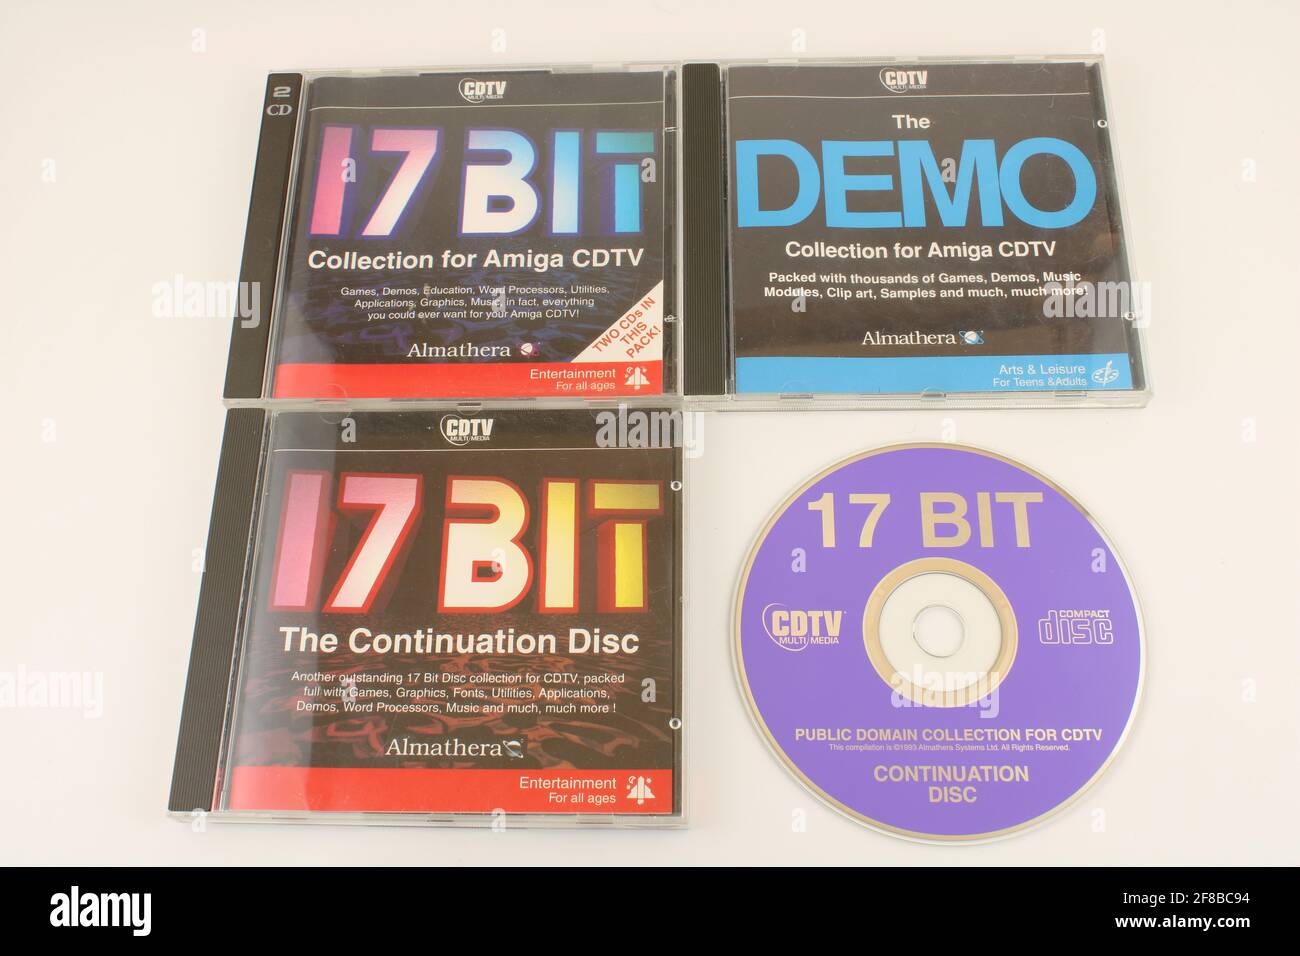 Amiga 17 bit CDs for CDTV. Old Amiga games and graphics concept Stock Photo